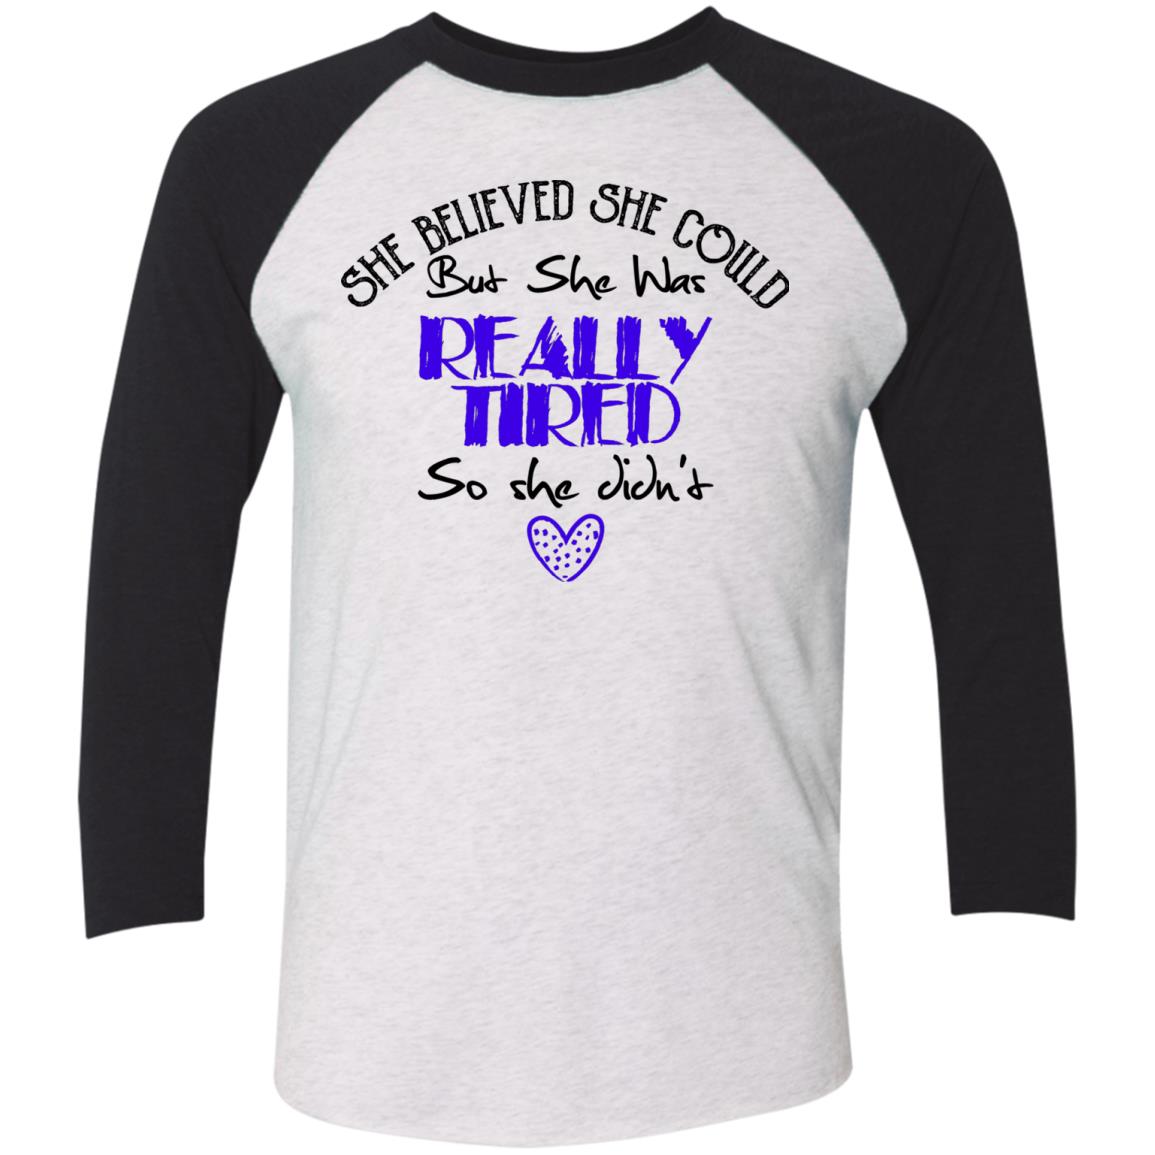 Funny Baseball Raglan T-Shirt for Women - She Believed She Could But She Was Really Tiered - GoneBold.gift